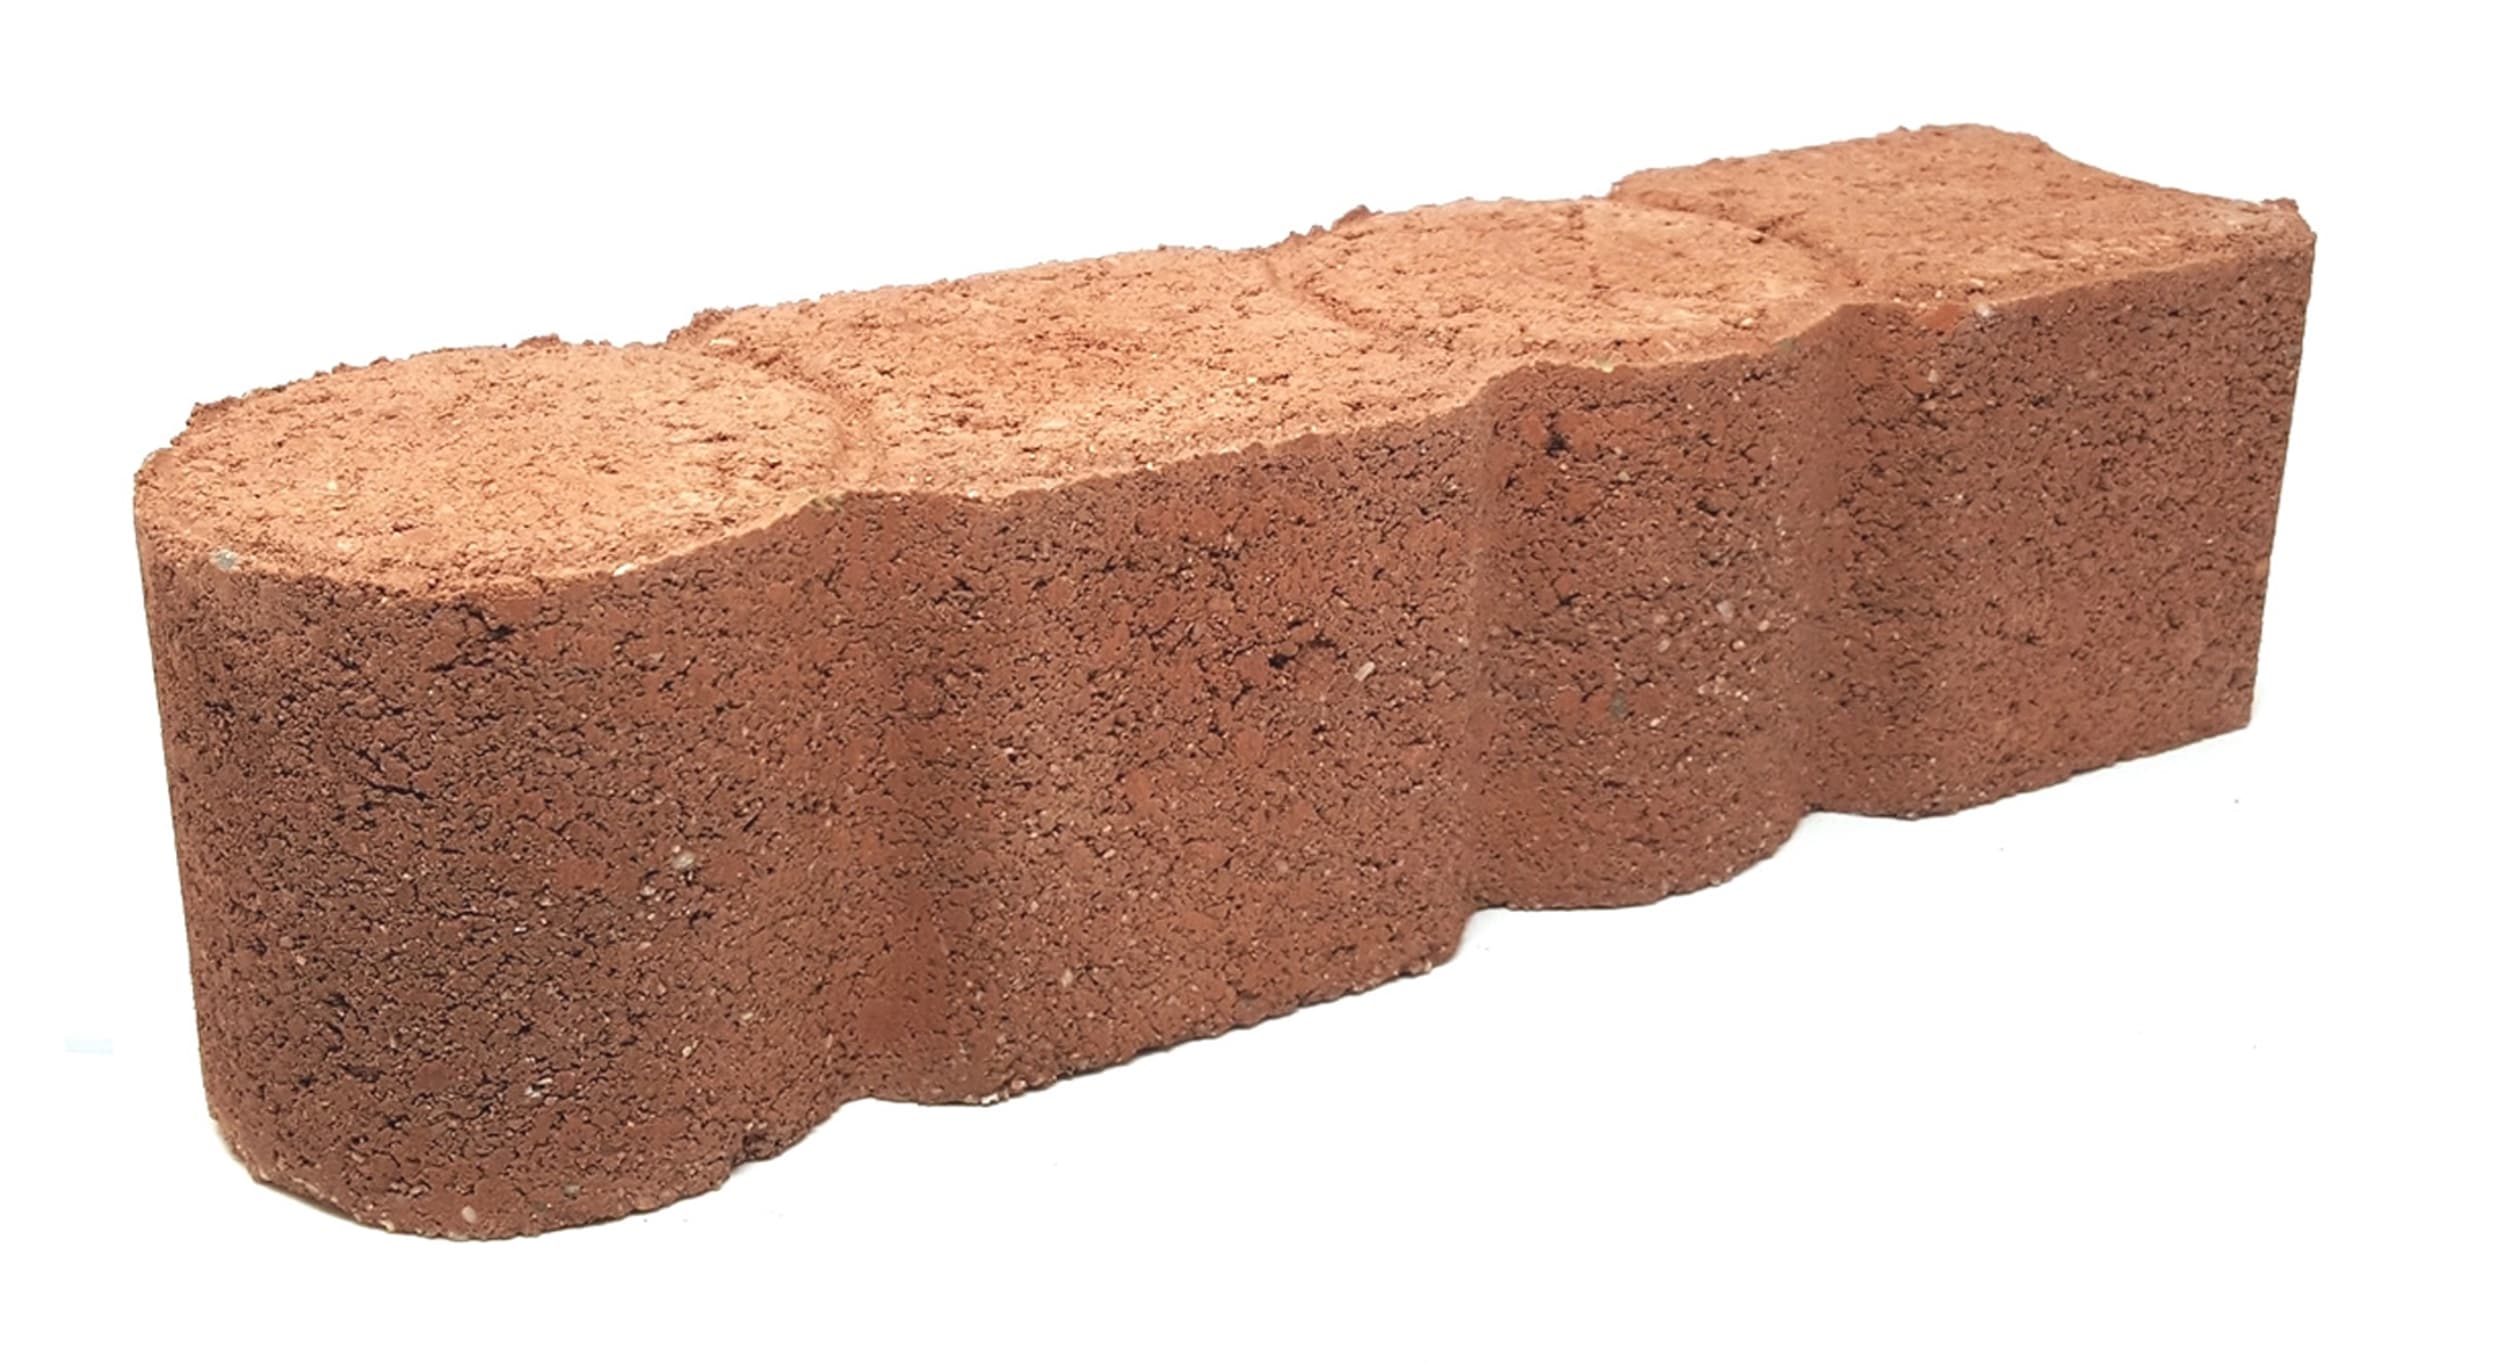 Geometric 12-in L x 4-in W x 3-in H Red Concrete Straight Edging Stone | - Lowe's KGER